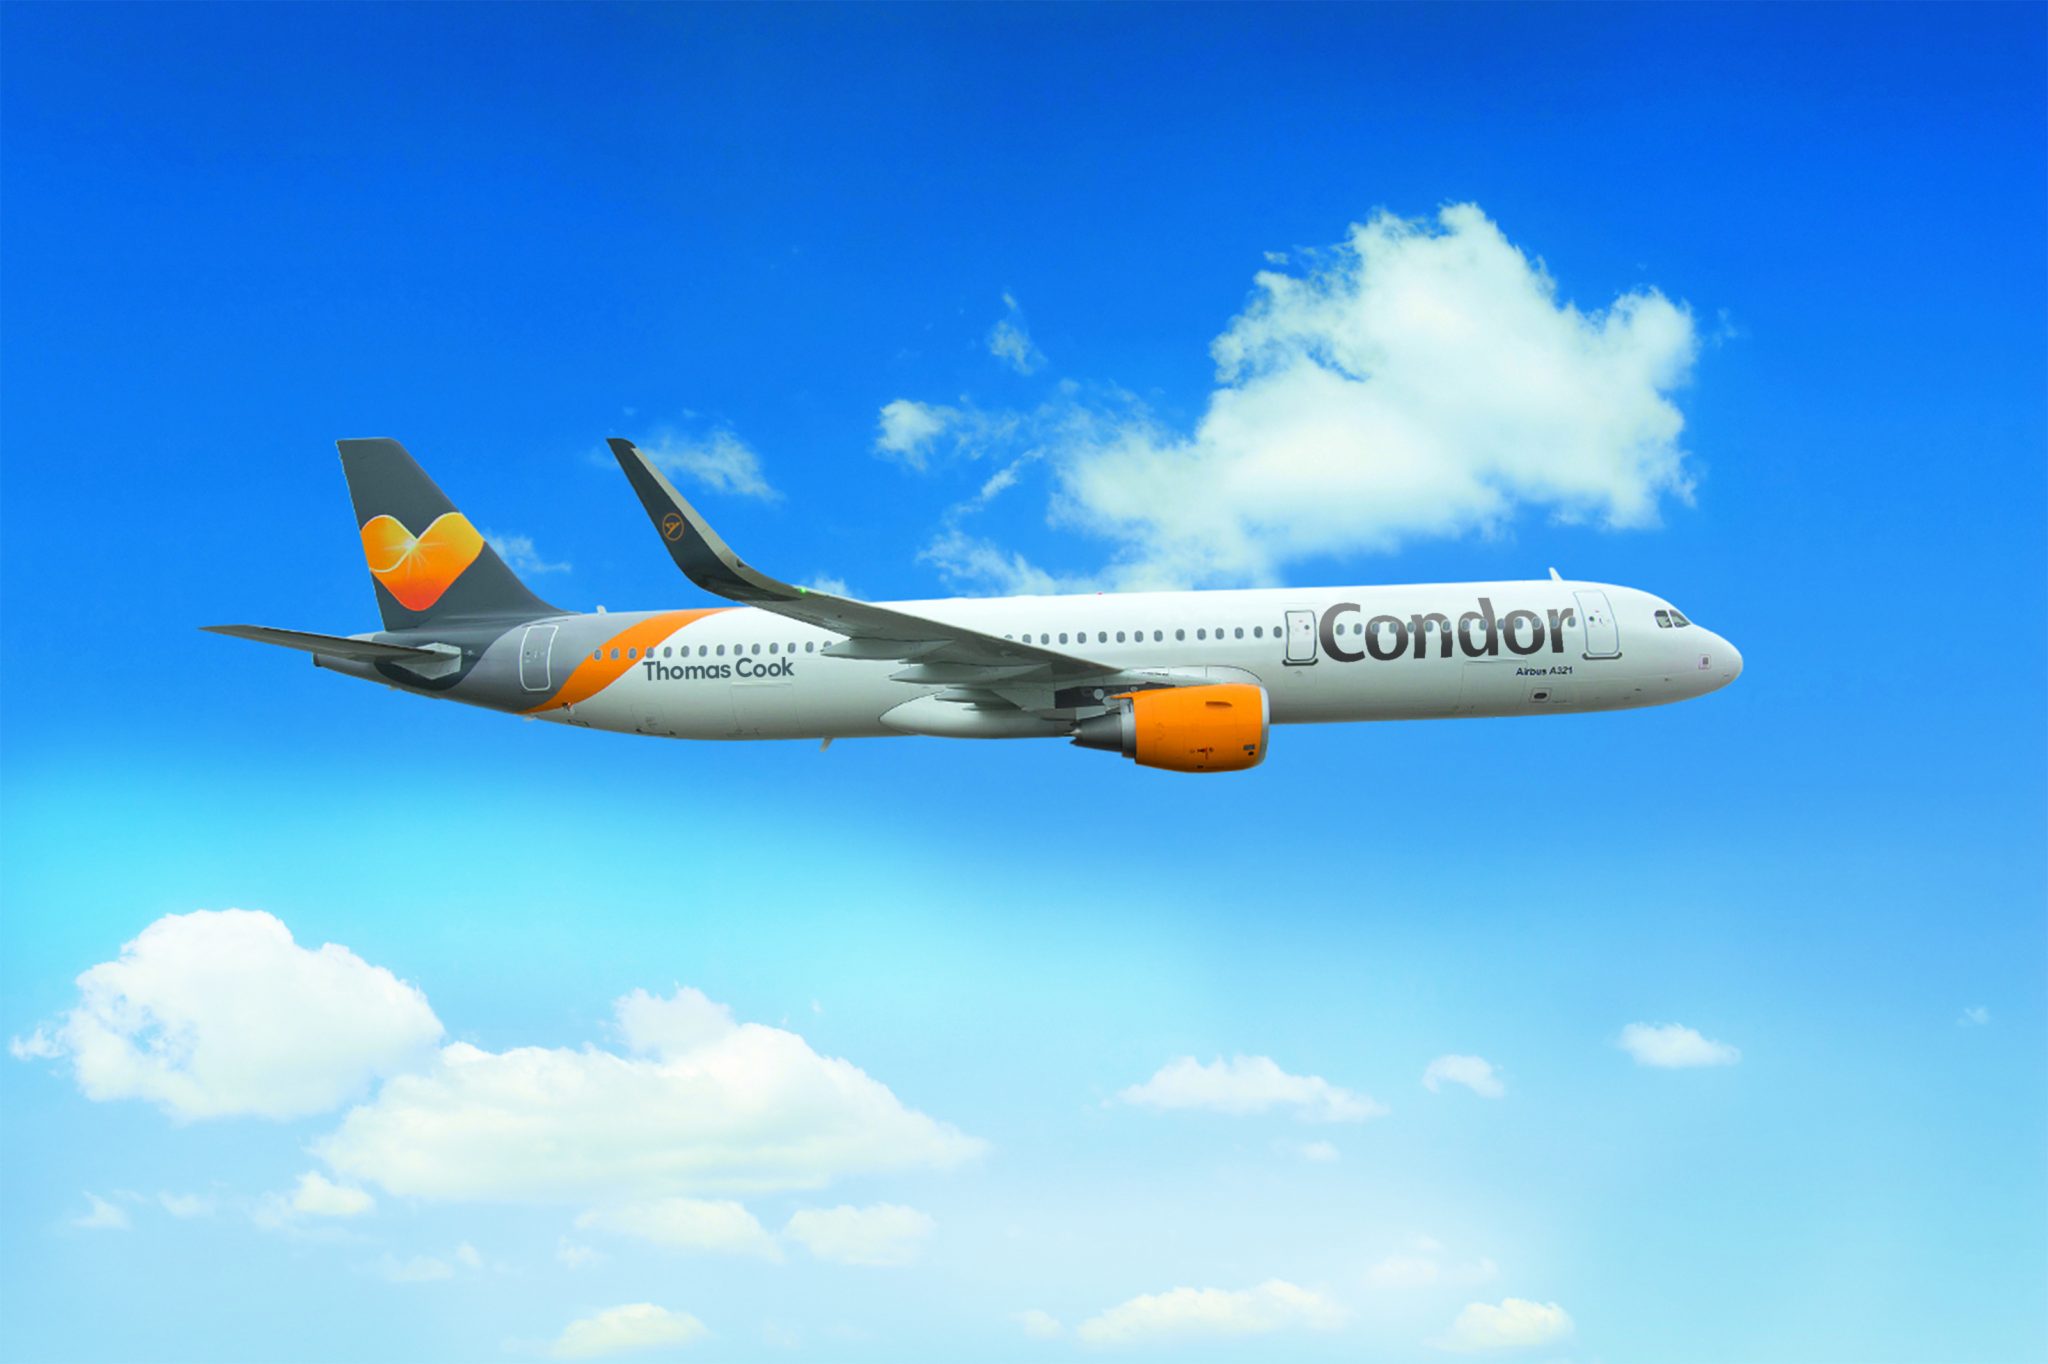 Airbus delivers first of 16 A330-900s to Condor